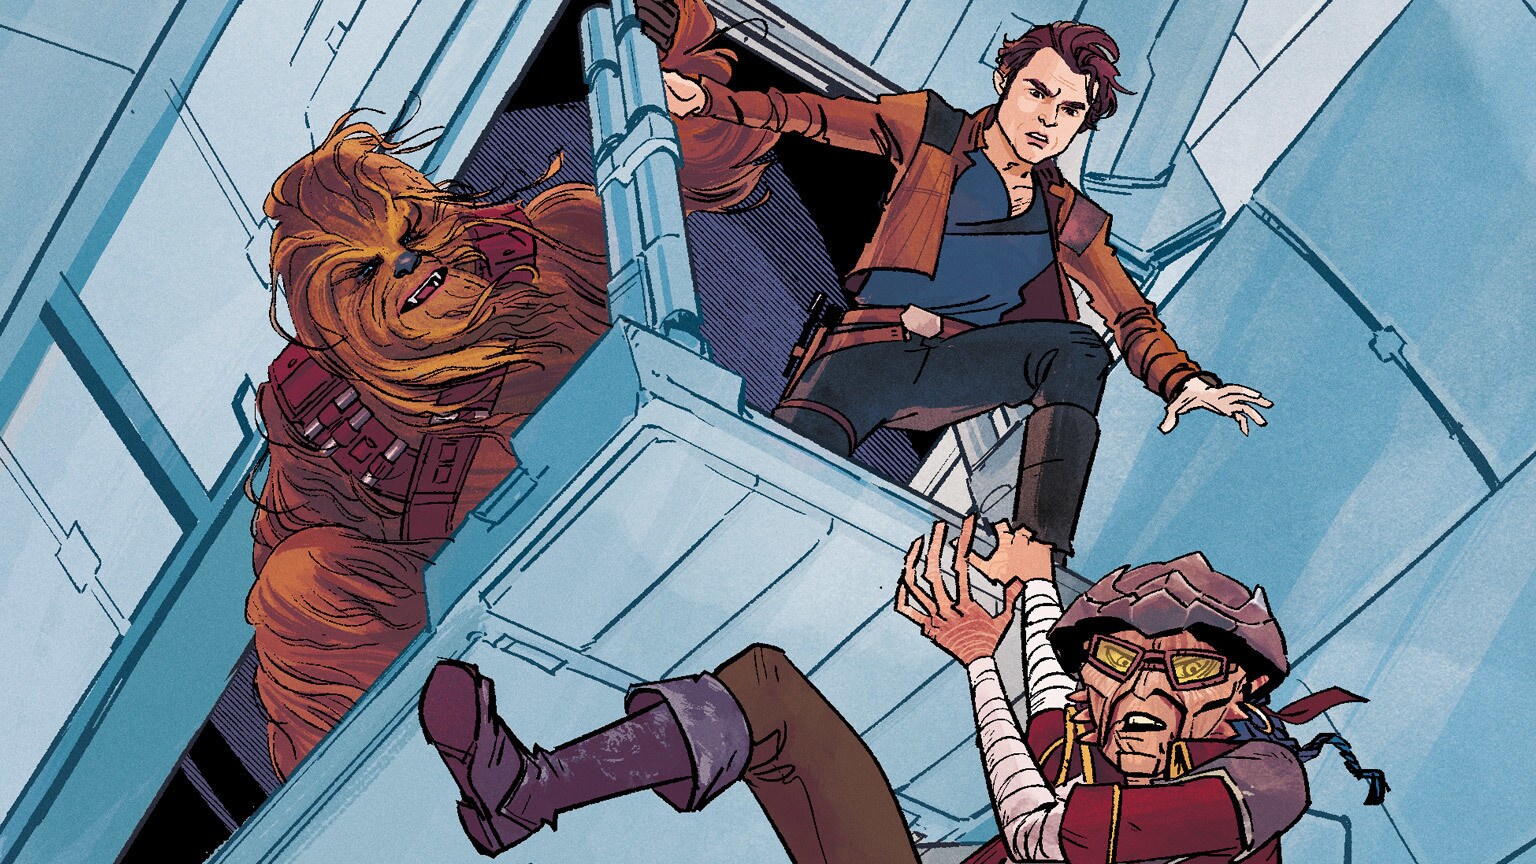 Find Hondo Ohnaka on Batuu in this Star Wars: Pirate’s Price Exclusive Excerpt